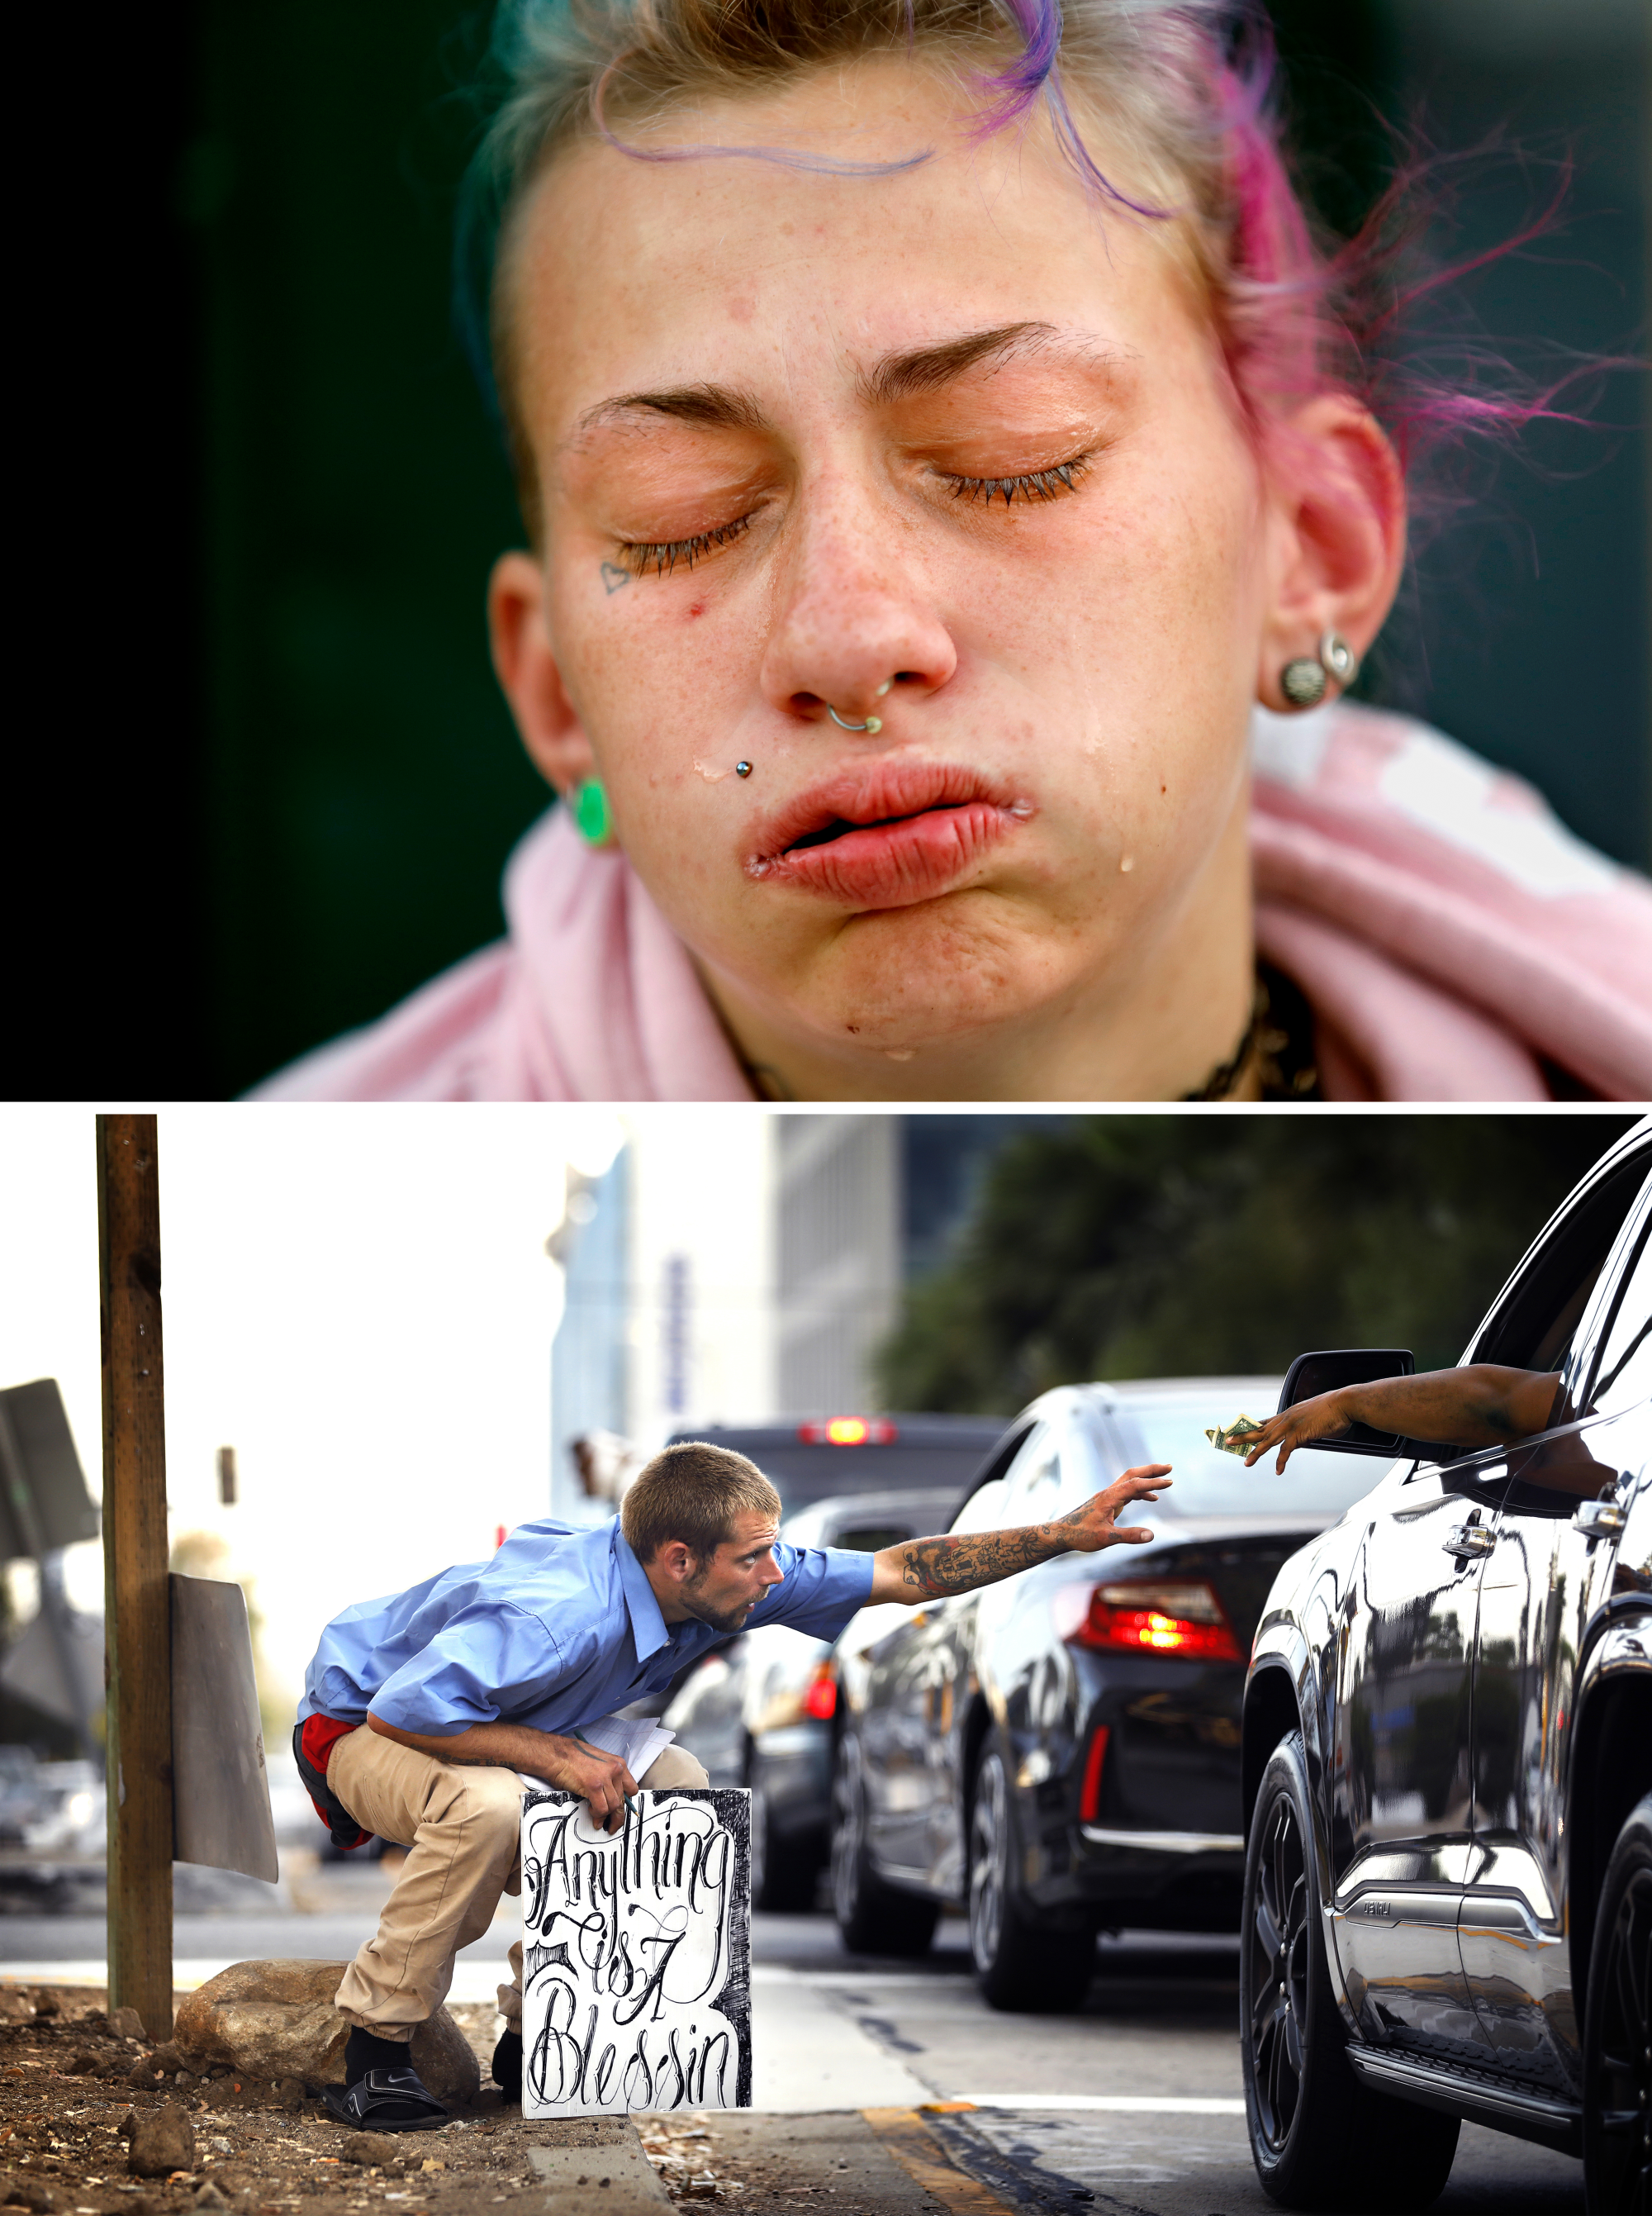 Two photos. A woman with colorful hair and eyes closed with tears on her cheeks. A man with a sign "Anything is a blessin"